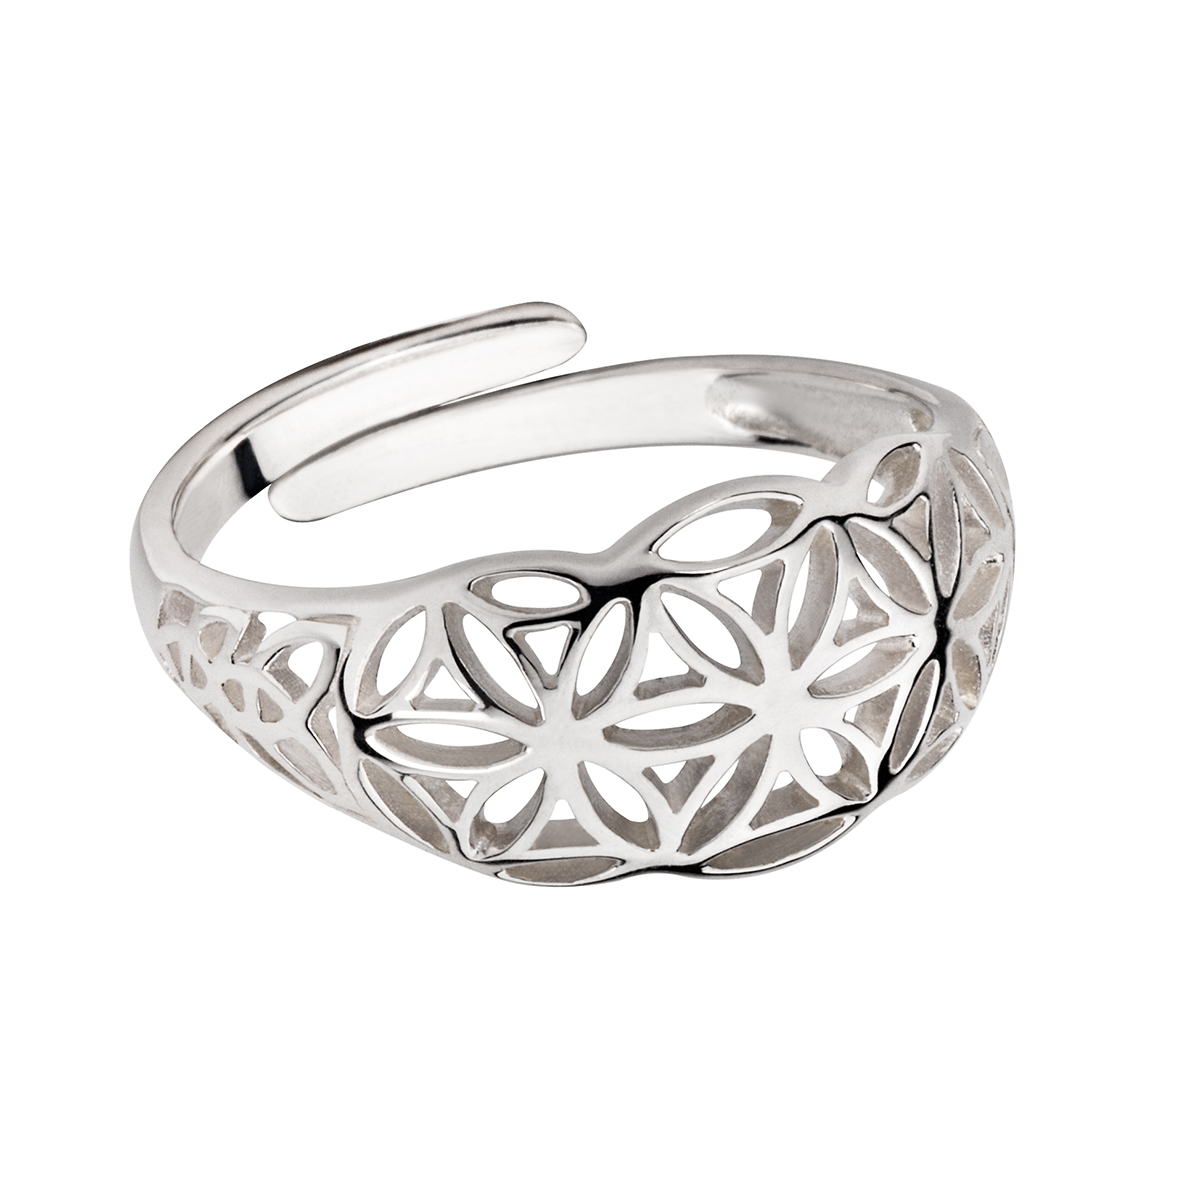 New Ring - Flower of Life - Silver